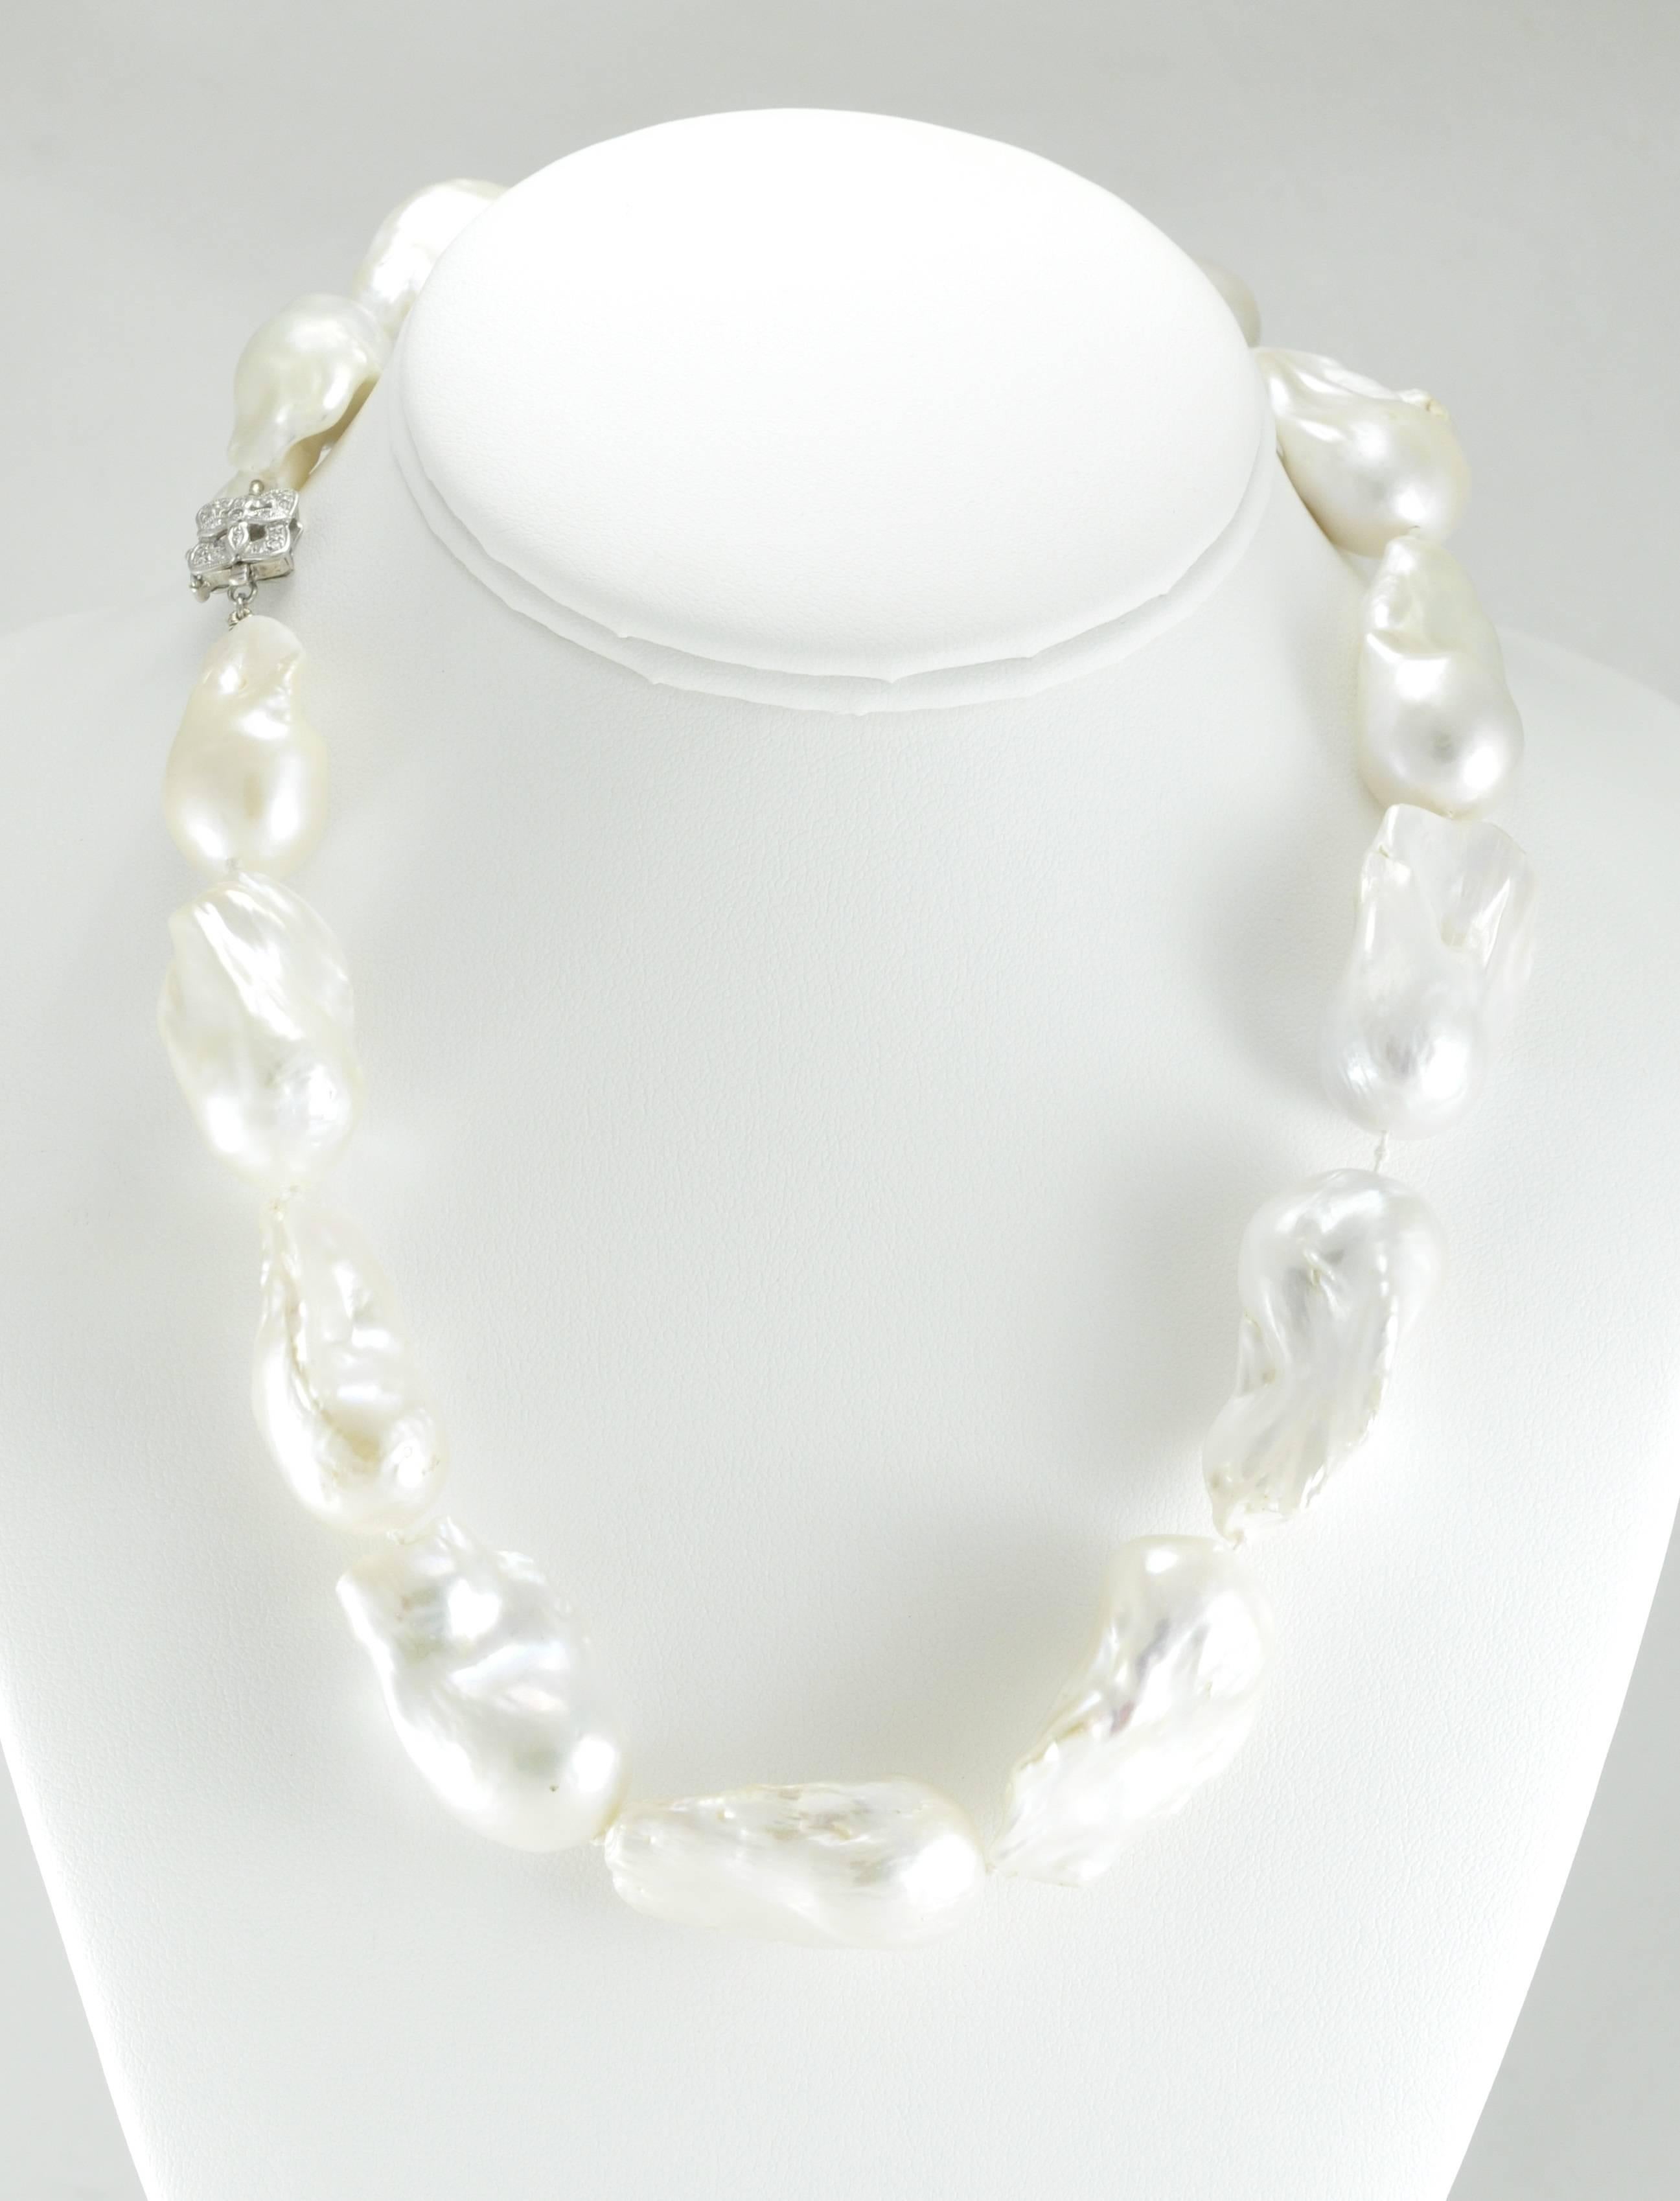 Baroque Pearl Necklace 18 inches with .2CT Diamonds in a 14K White Gold Vintage Clasp
Pearls vary in size but are approximately .75 inches wide by 1.25 inch long.
